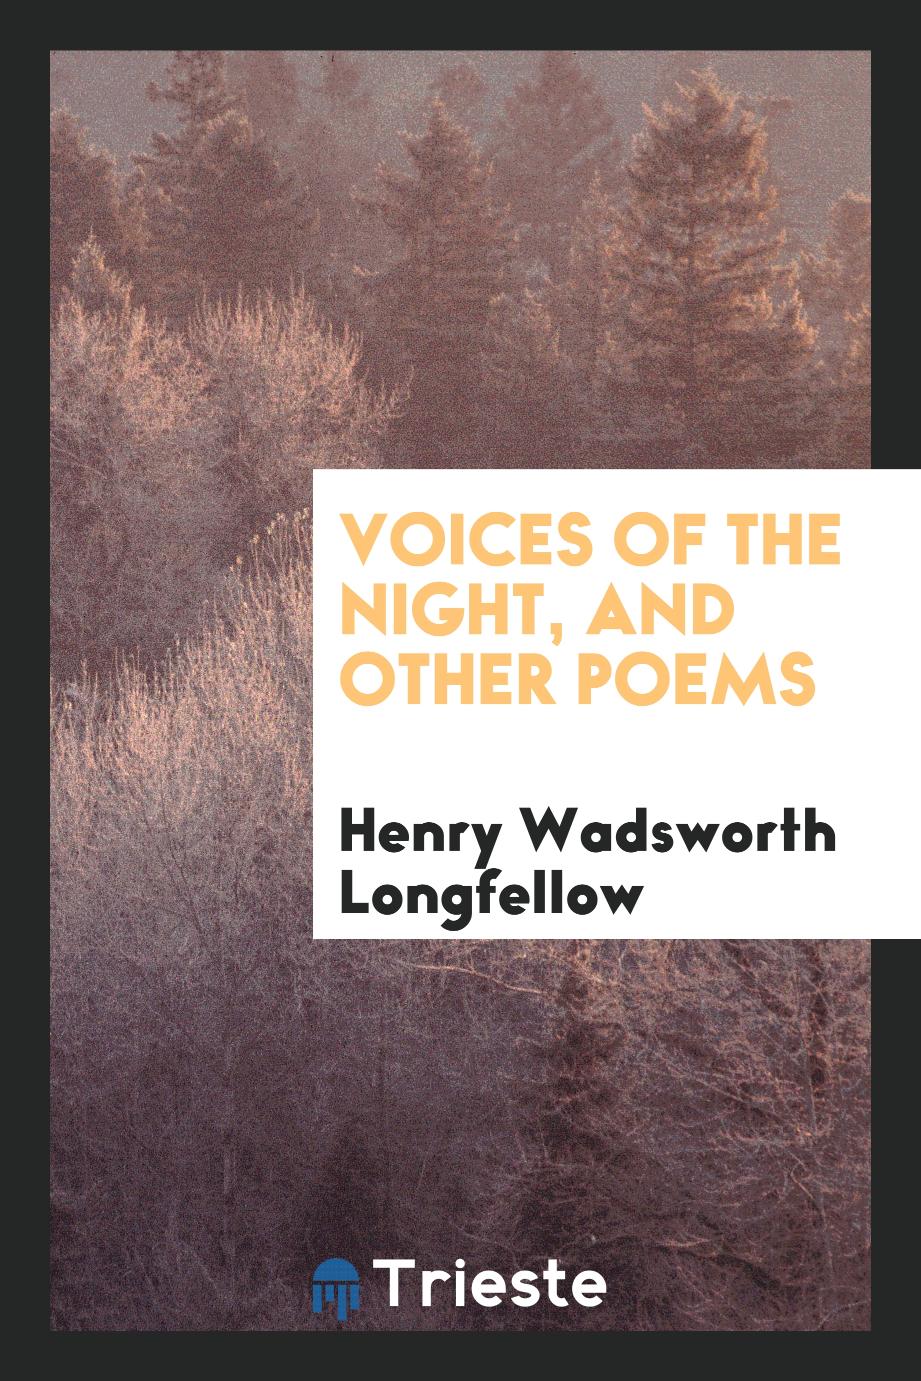 Voices of the night, and other poems